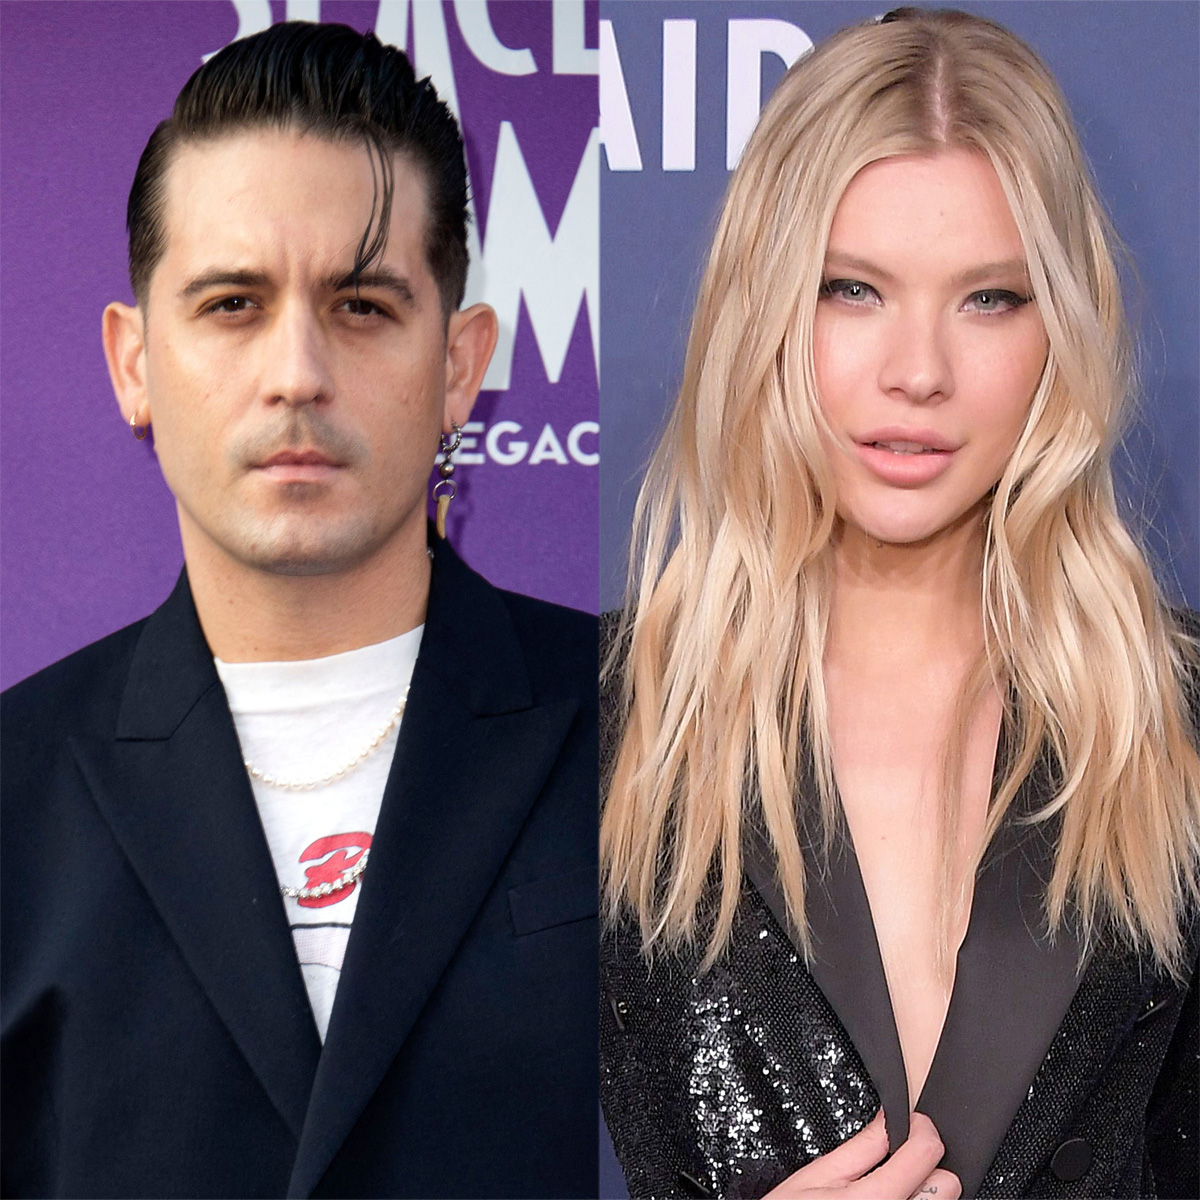 All the Details on GEazy's New Romance With Josie Canseco